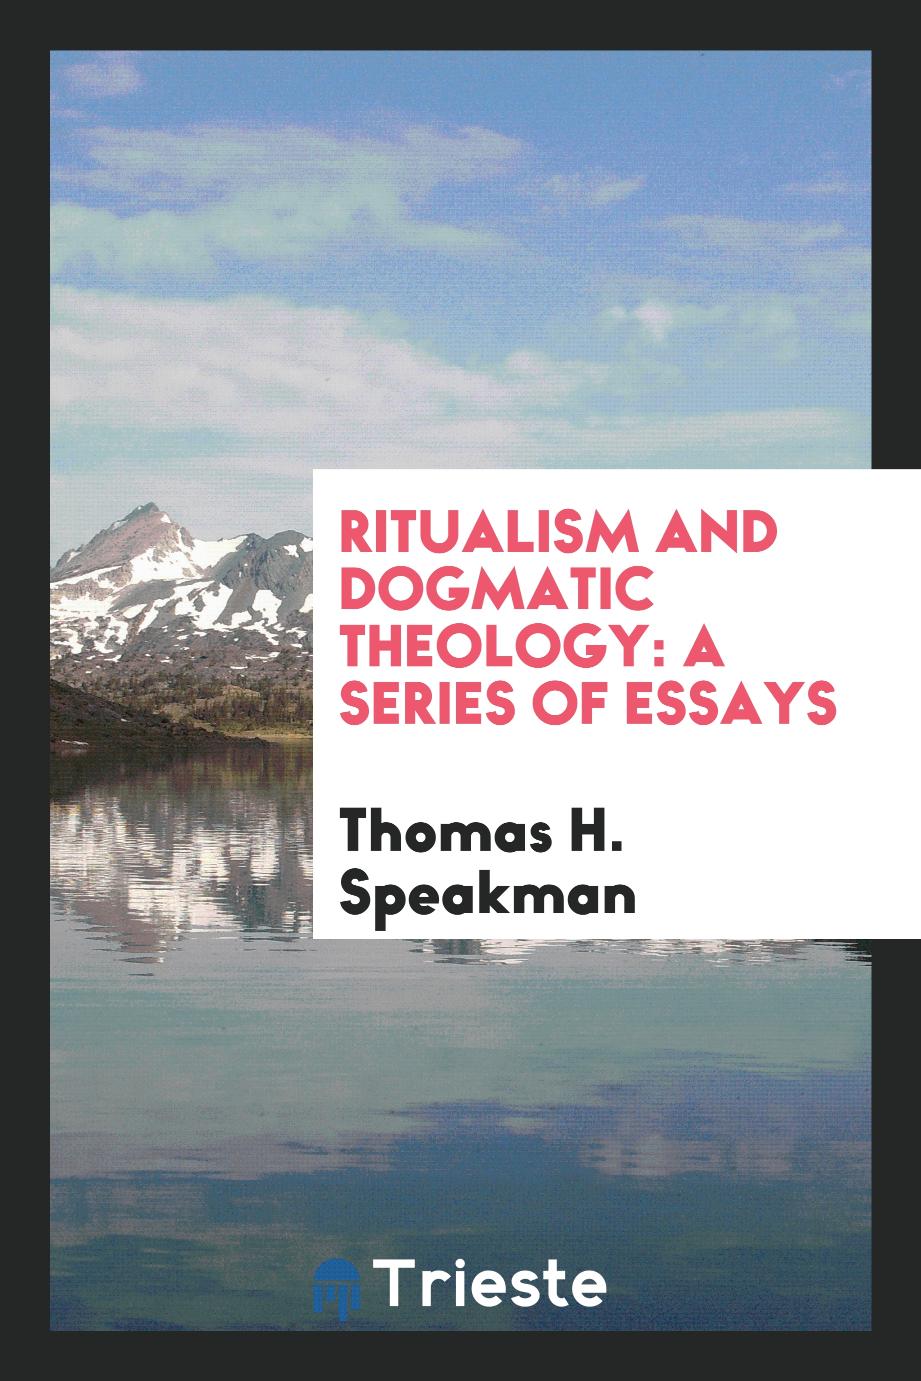 Ritualism and Dogmatic Theology: A Series of Essays